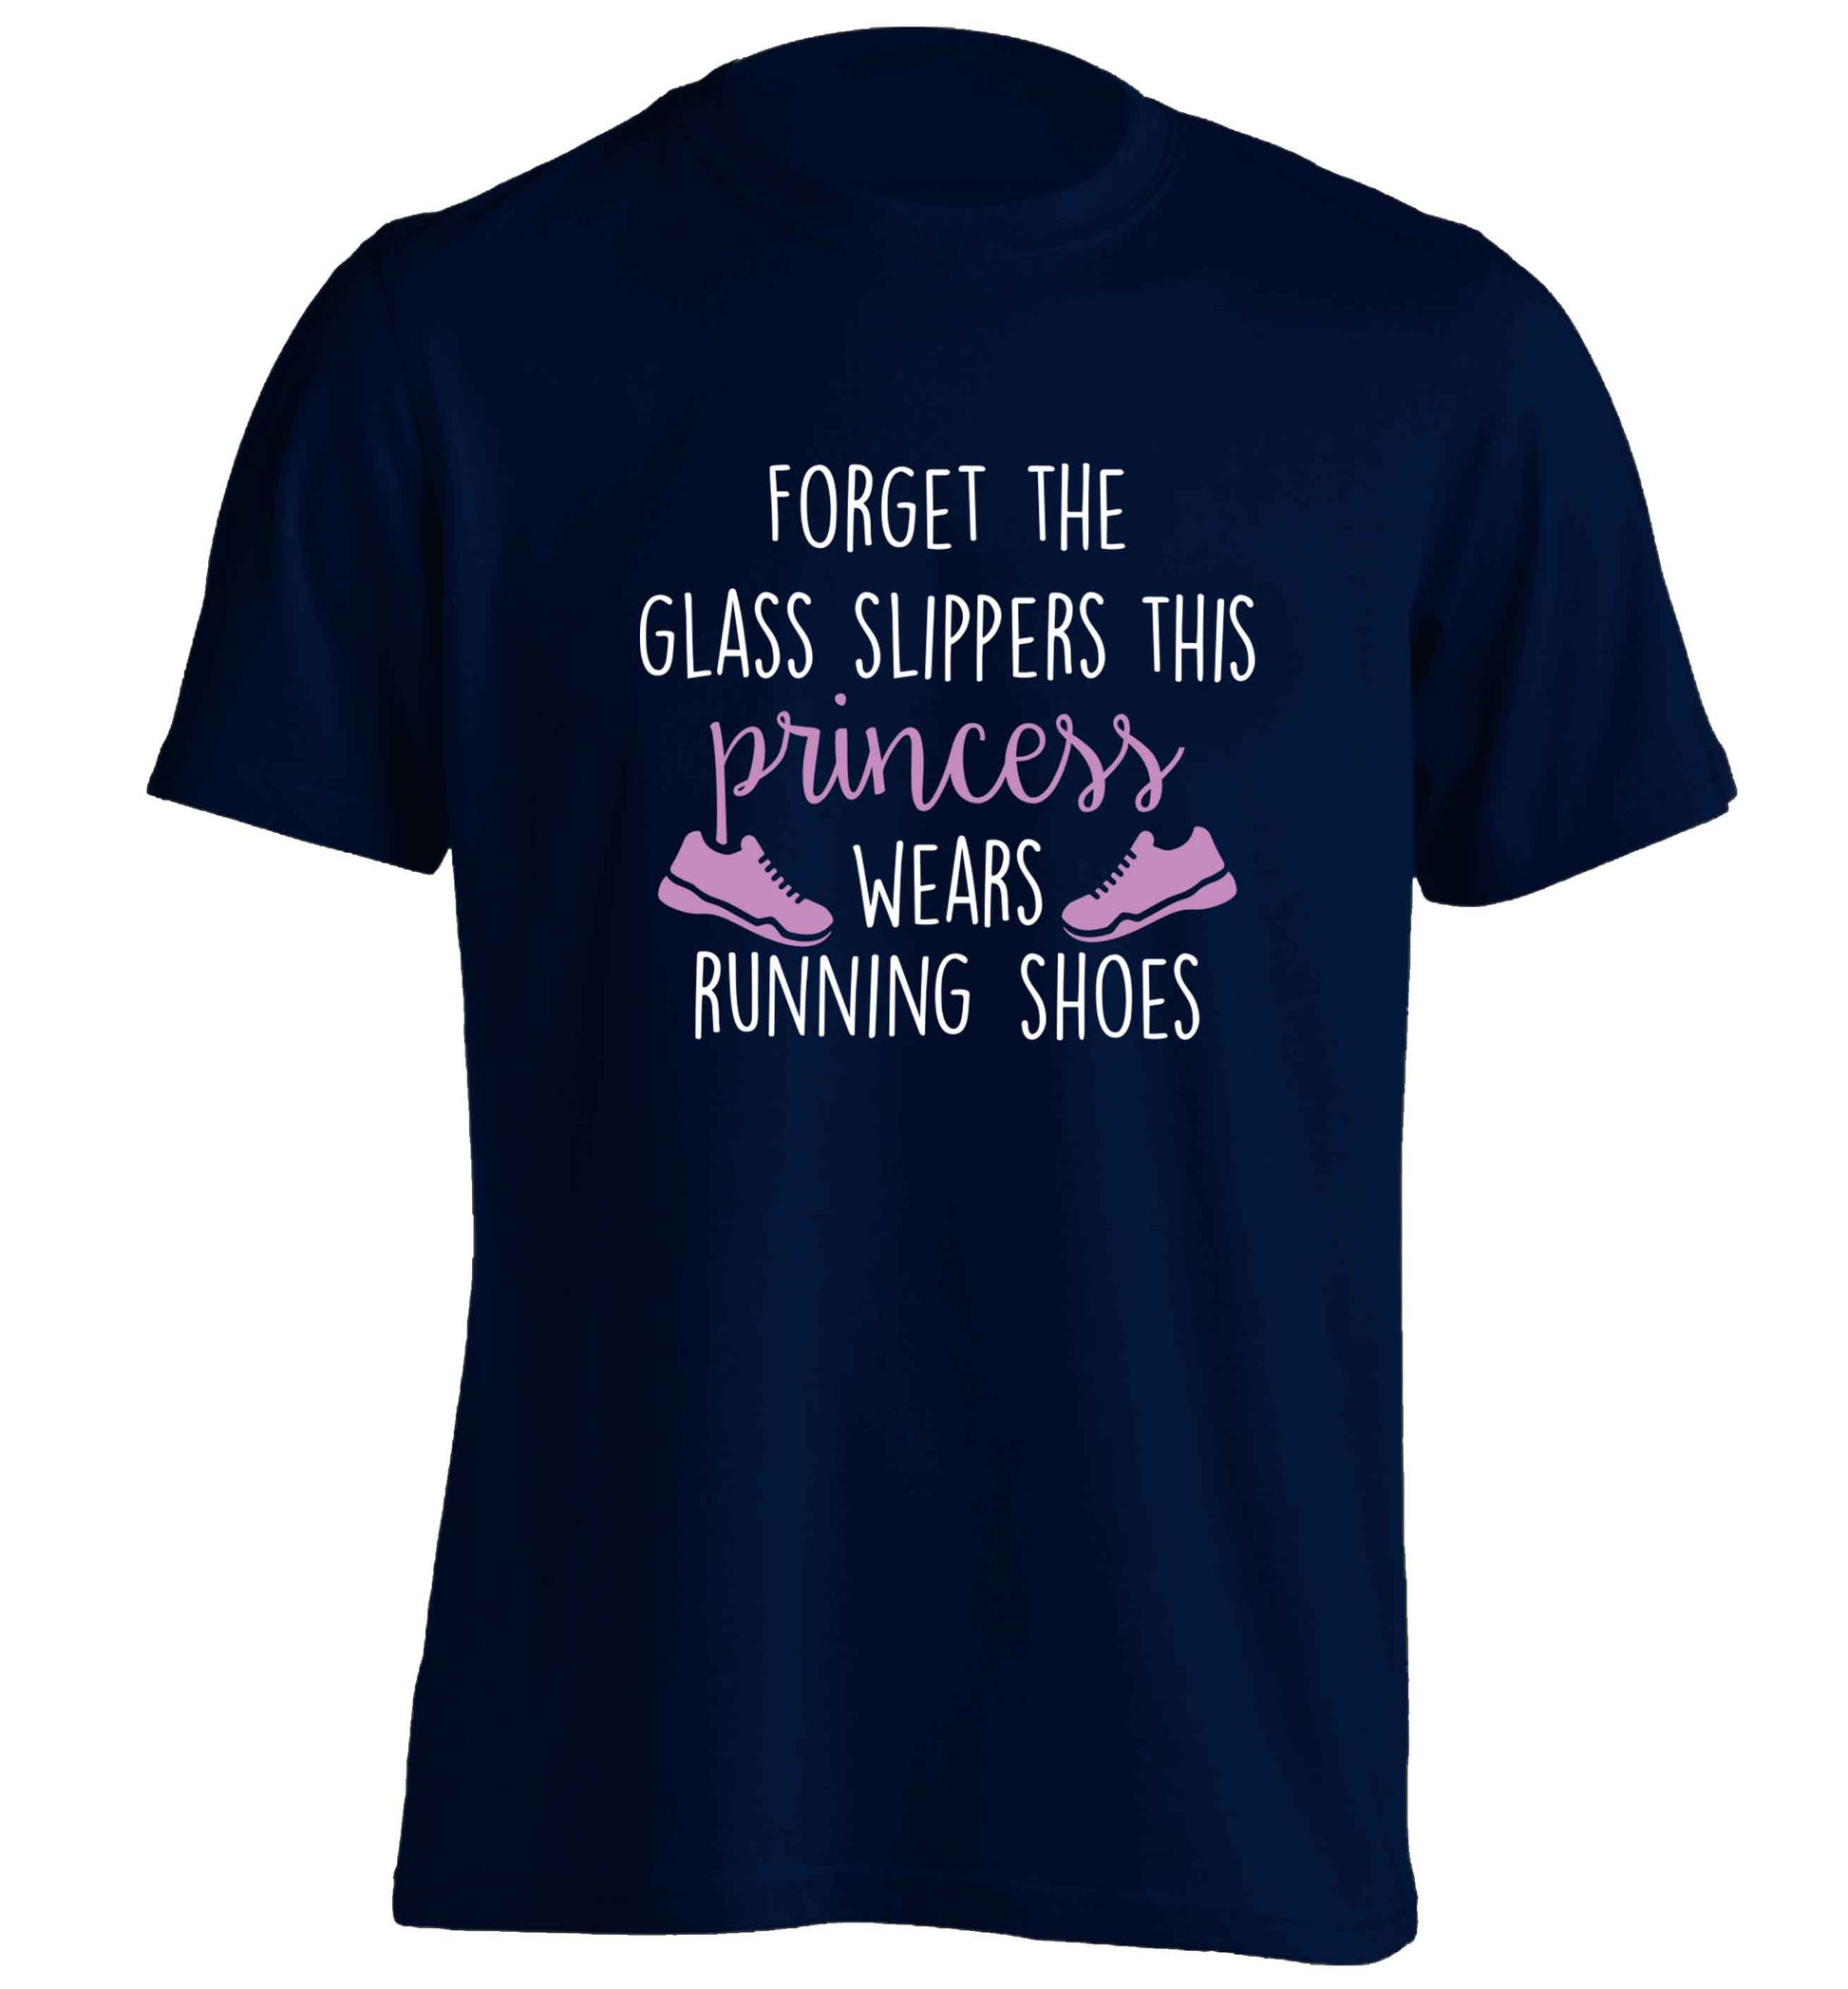 Forget the glass slippers this princess wears running shoes adults unisex navy Tshirt 2XL